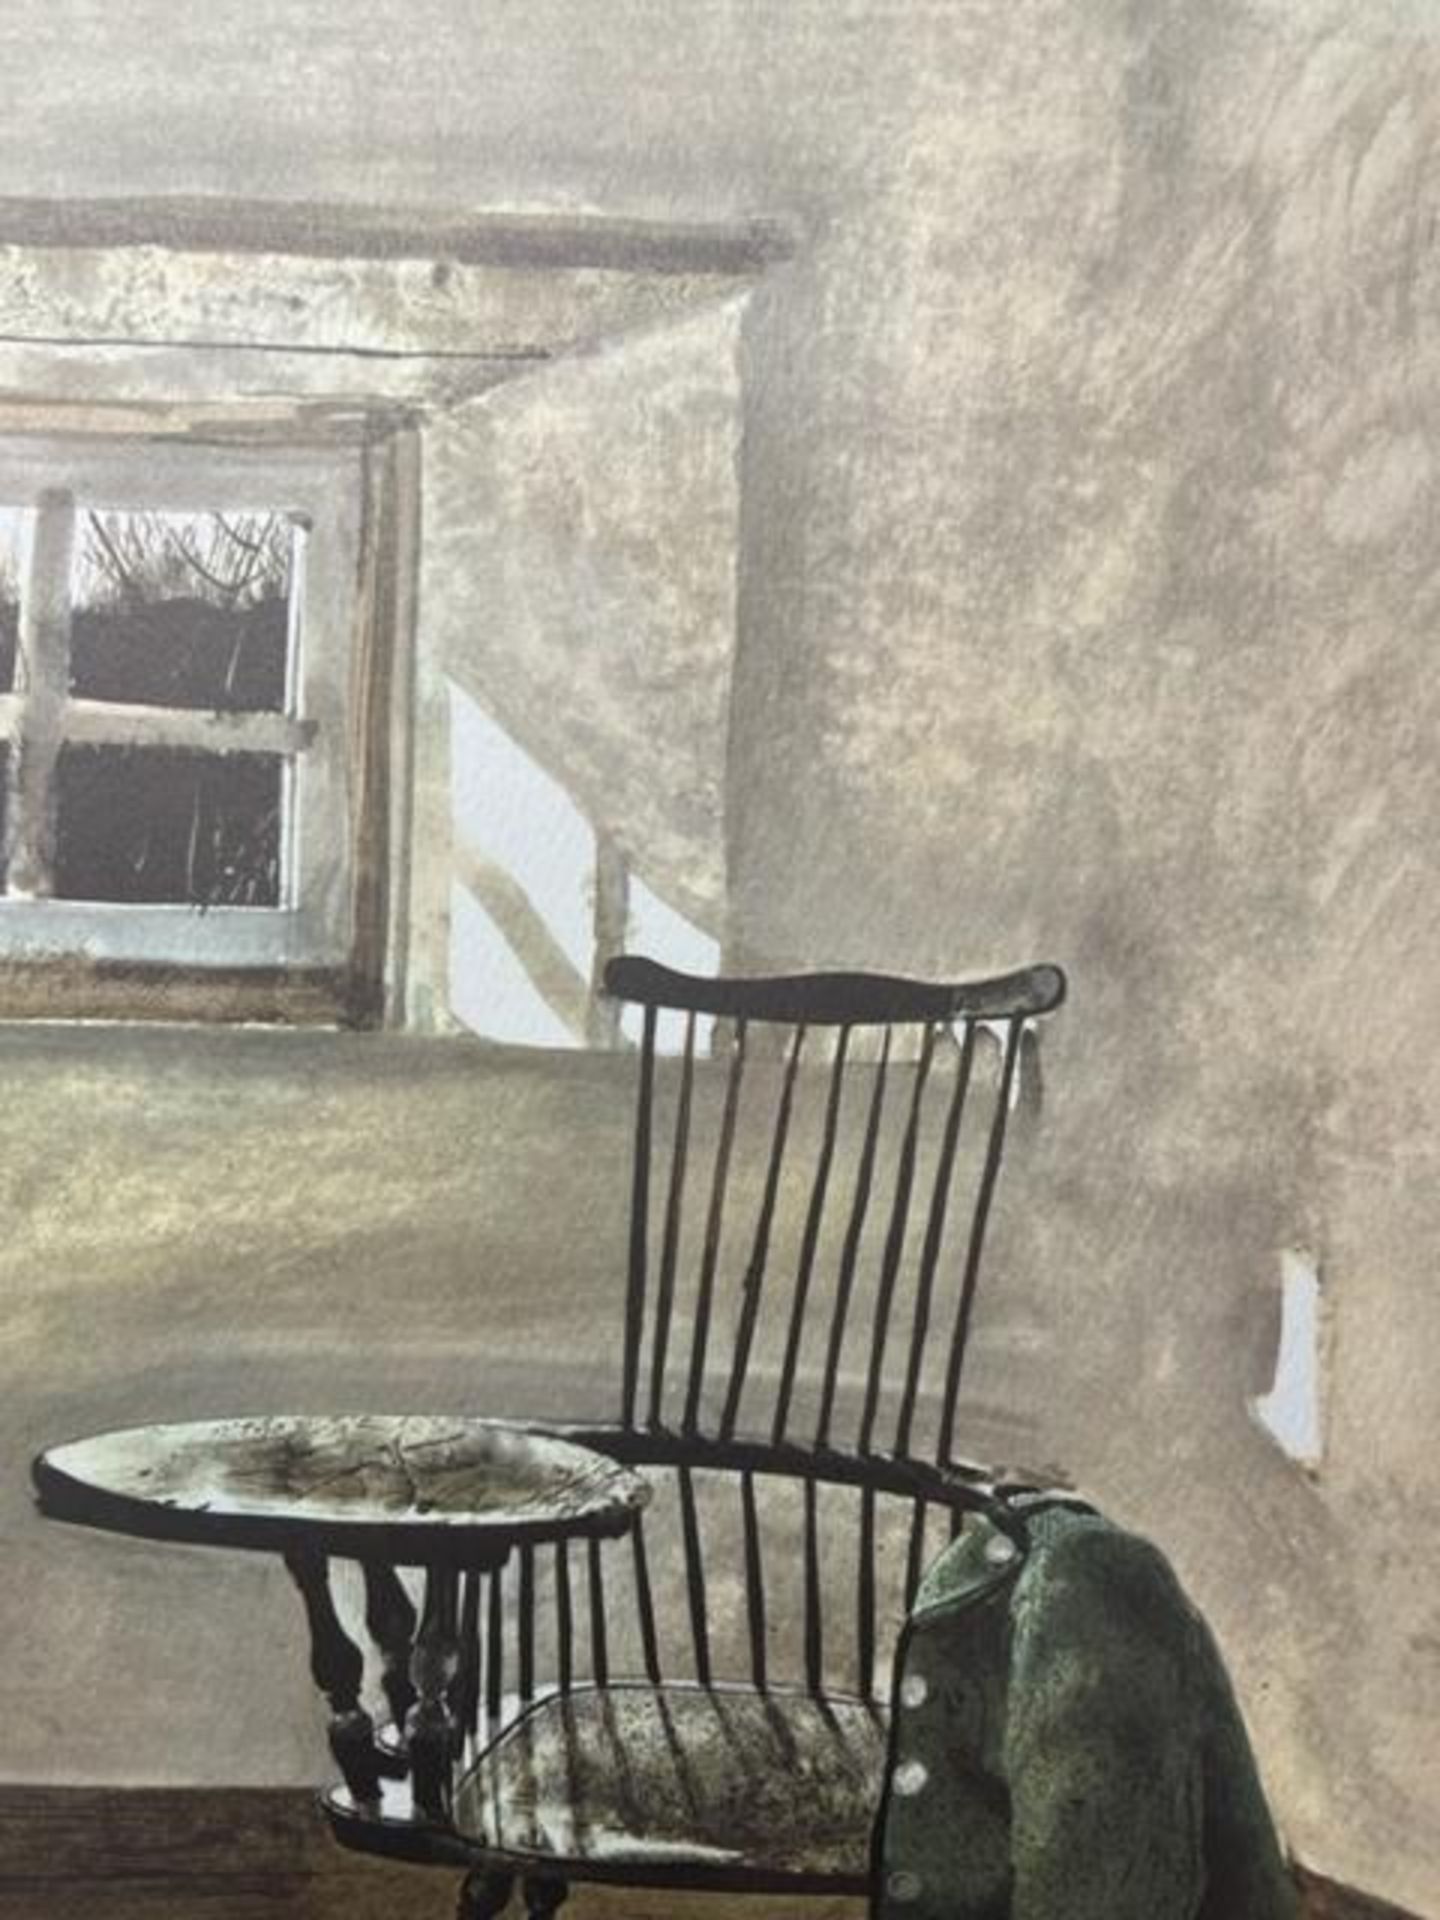 Andrew Wyeth "Early October" Print. - Image 3 of 6